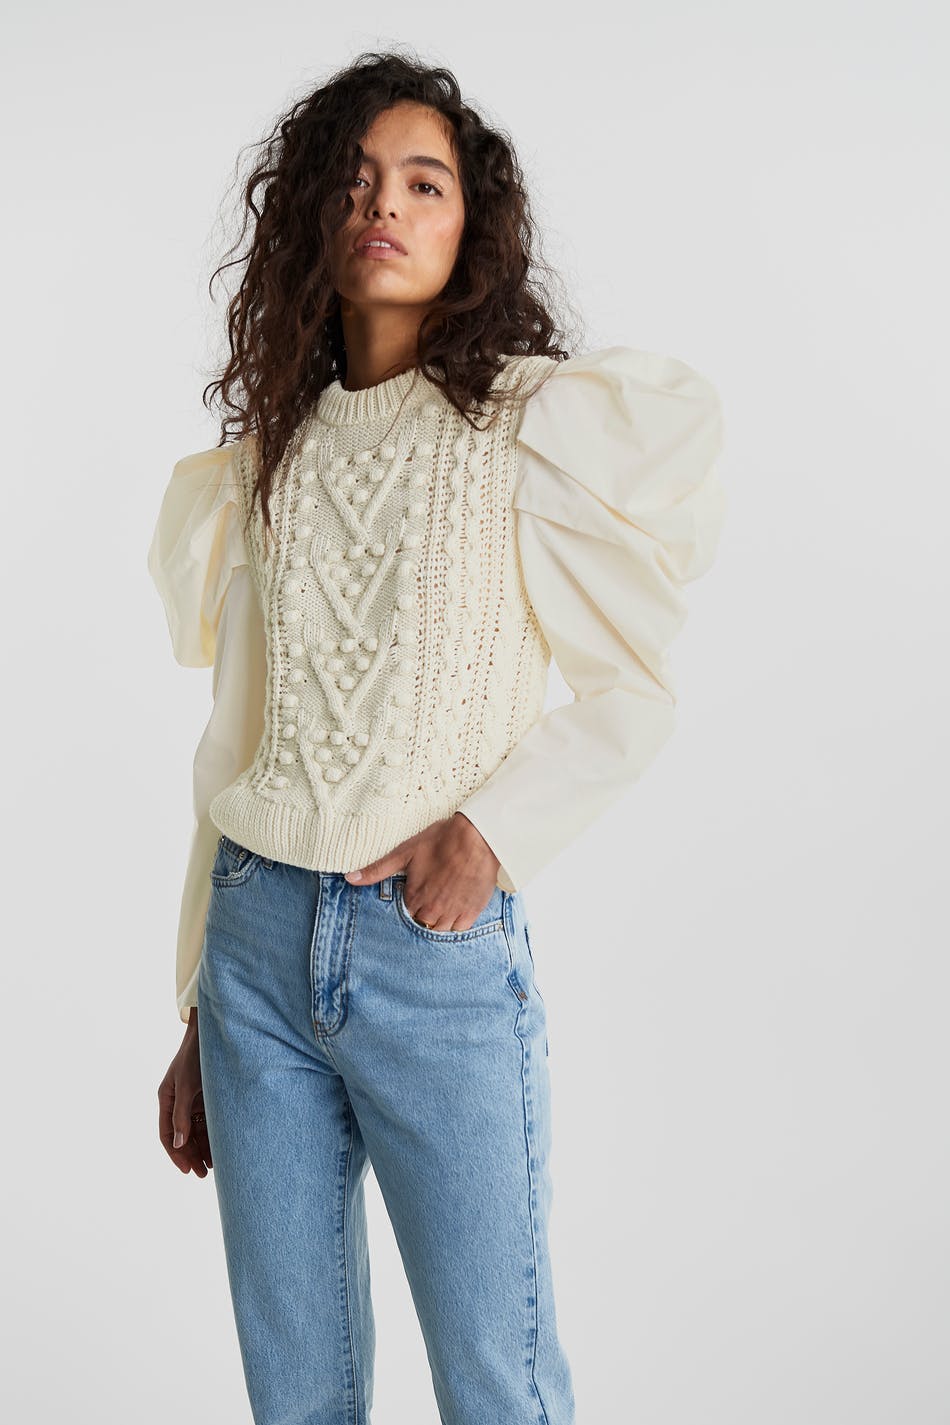 Elsa knitted sweater, Gina Tricot